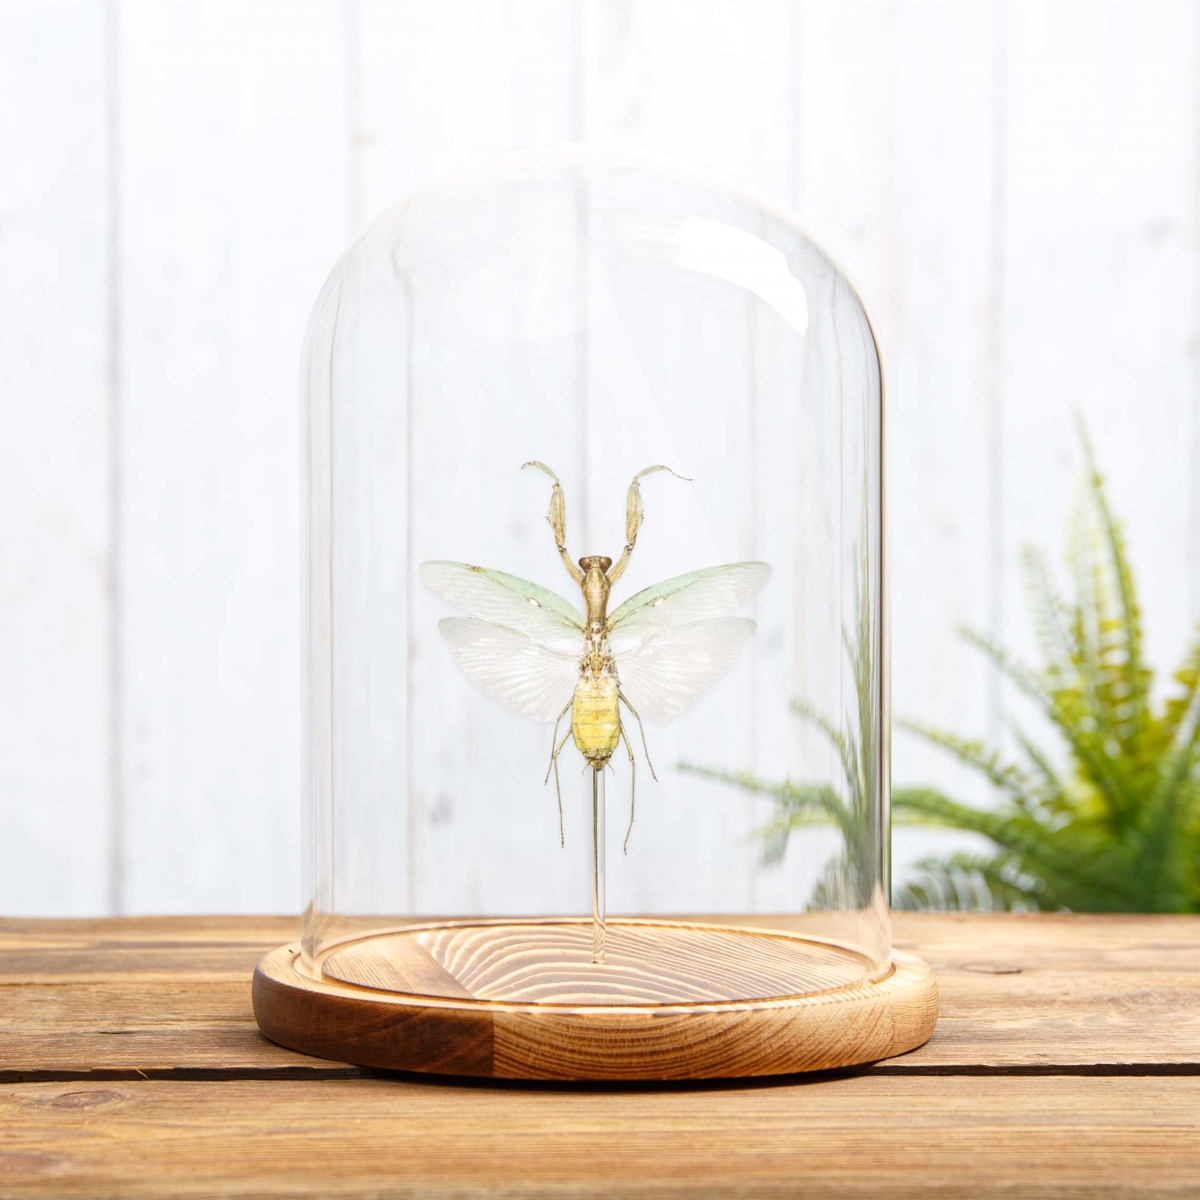 The Indochina Mantis in Glass Dome with Wooden Base (Hierodula patellifera)